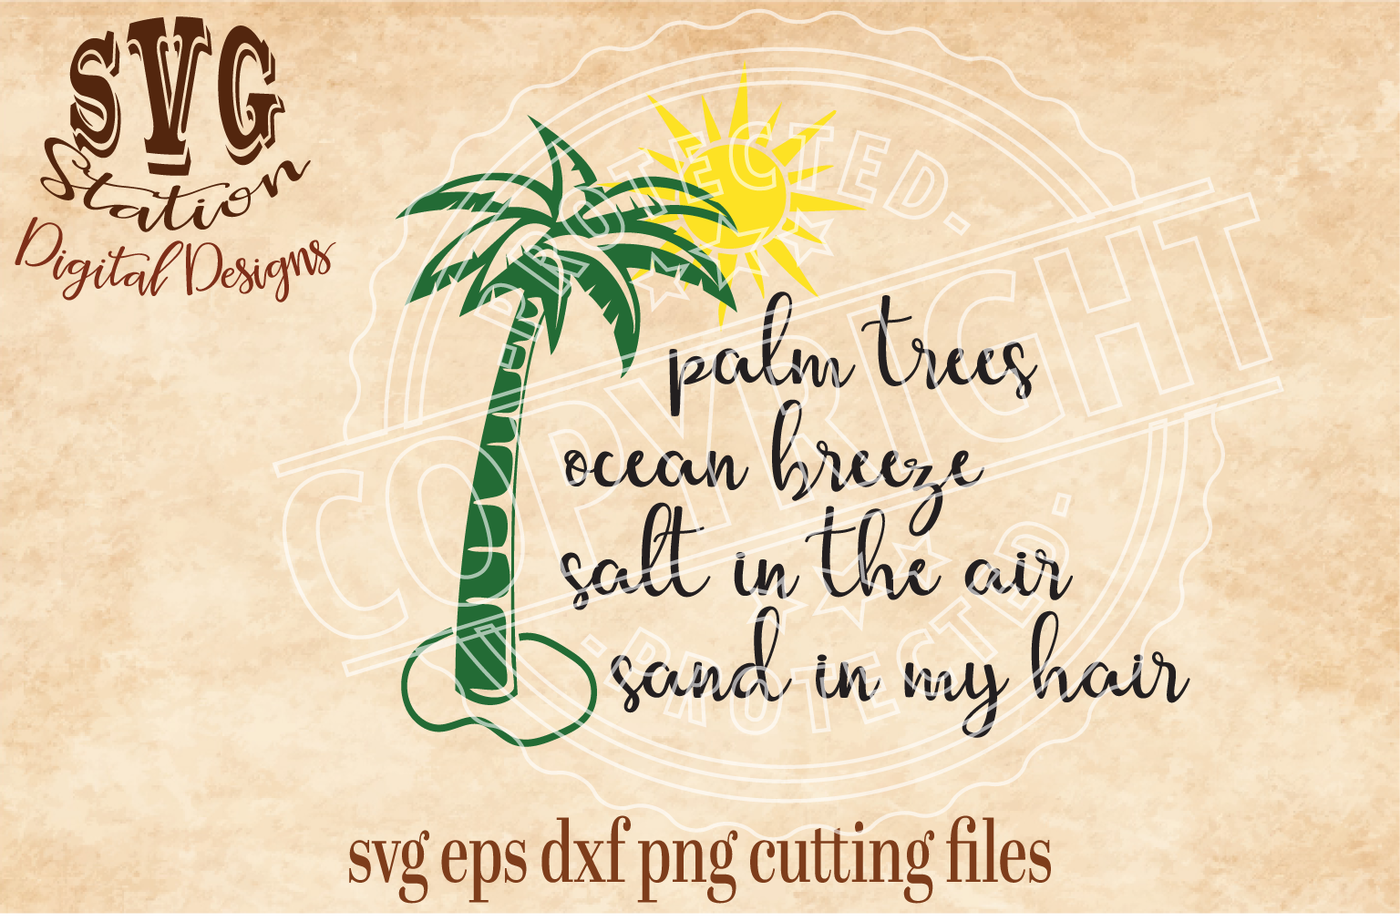 Palm Trees Ocean Breeze Svg Dxf Png Eps Cutting File Silhouette Cricut Scal By Svg Station Thehungryjpeg Com